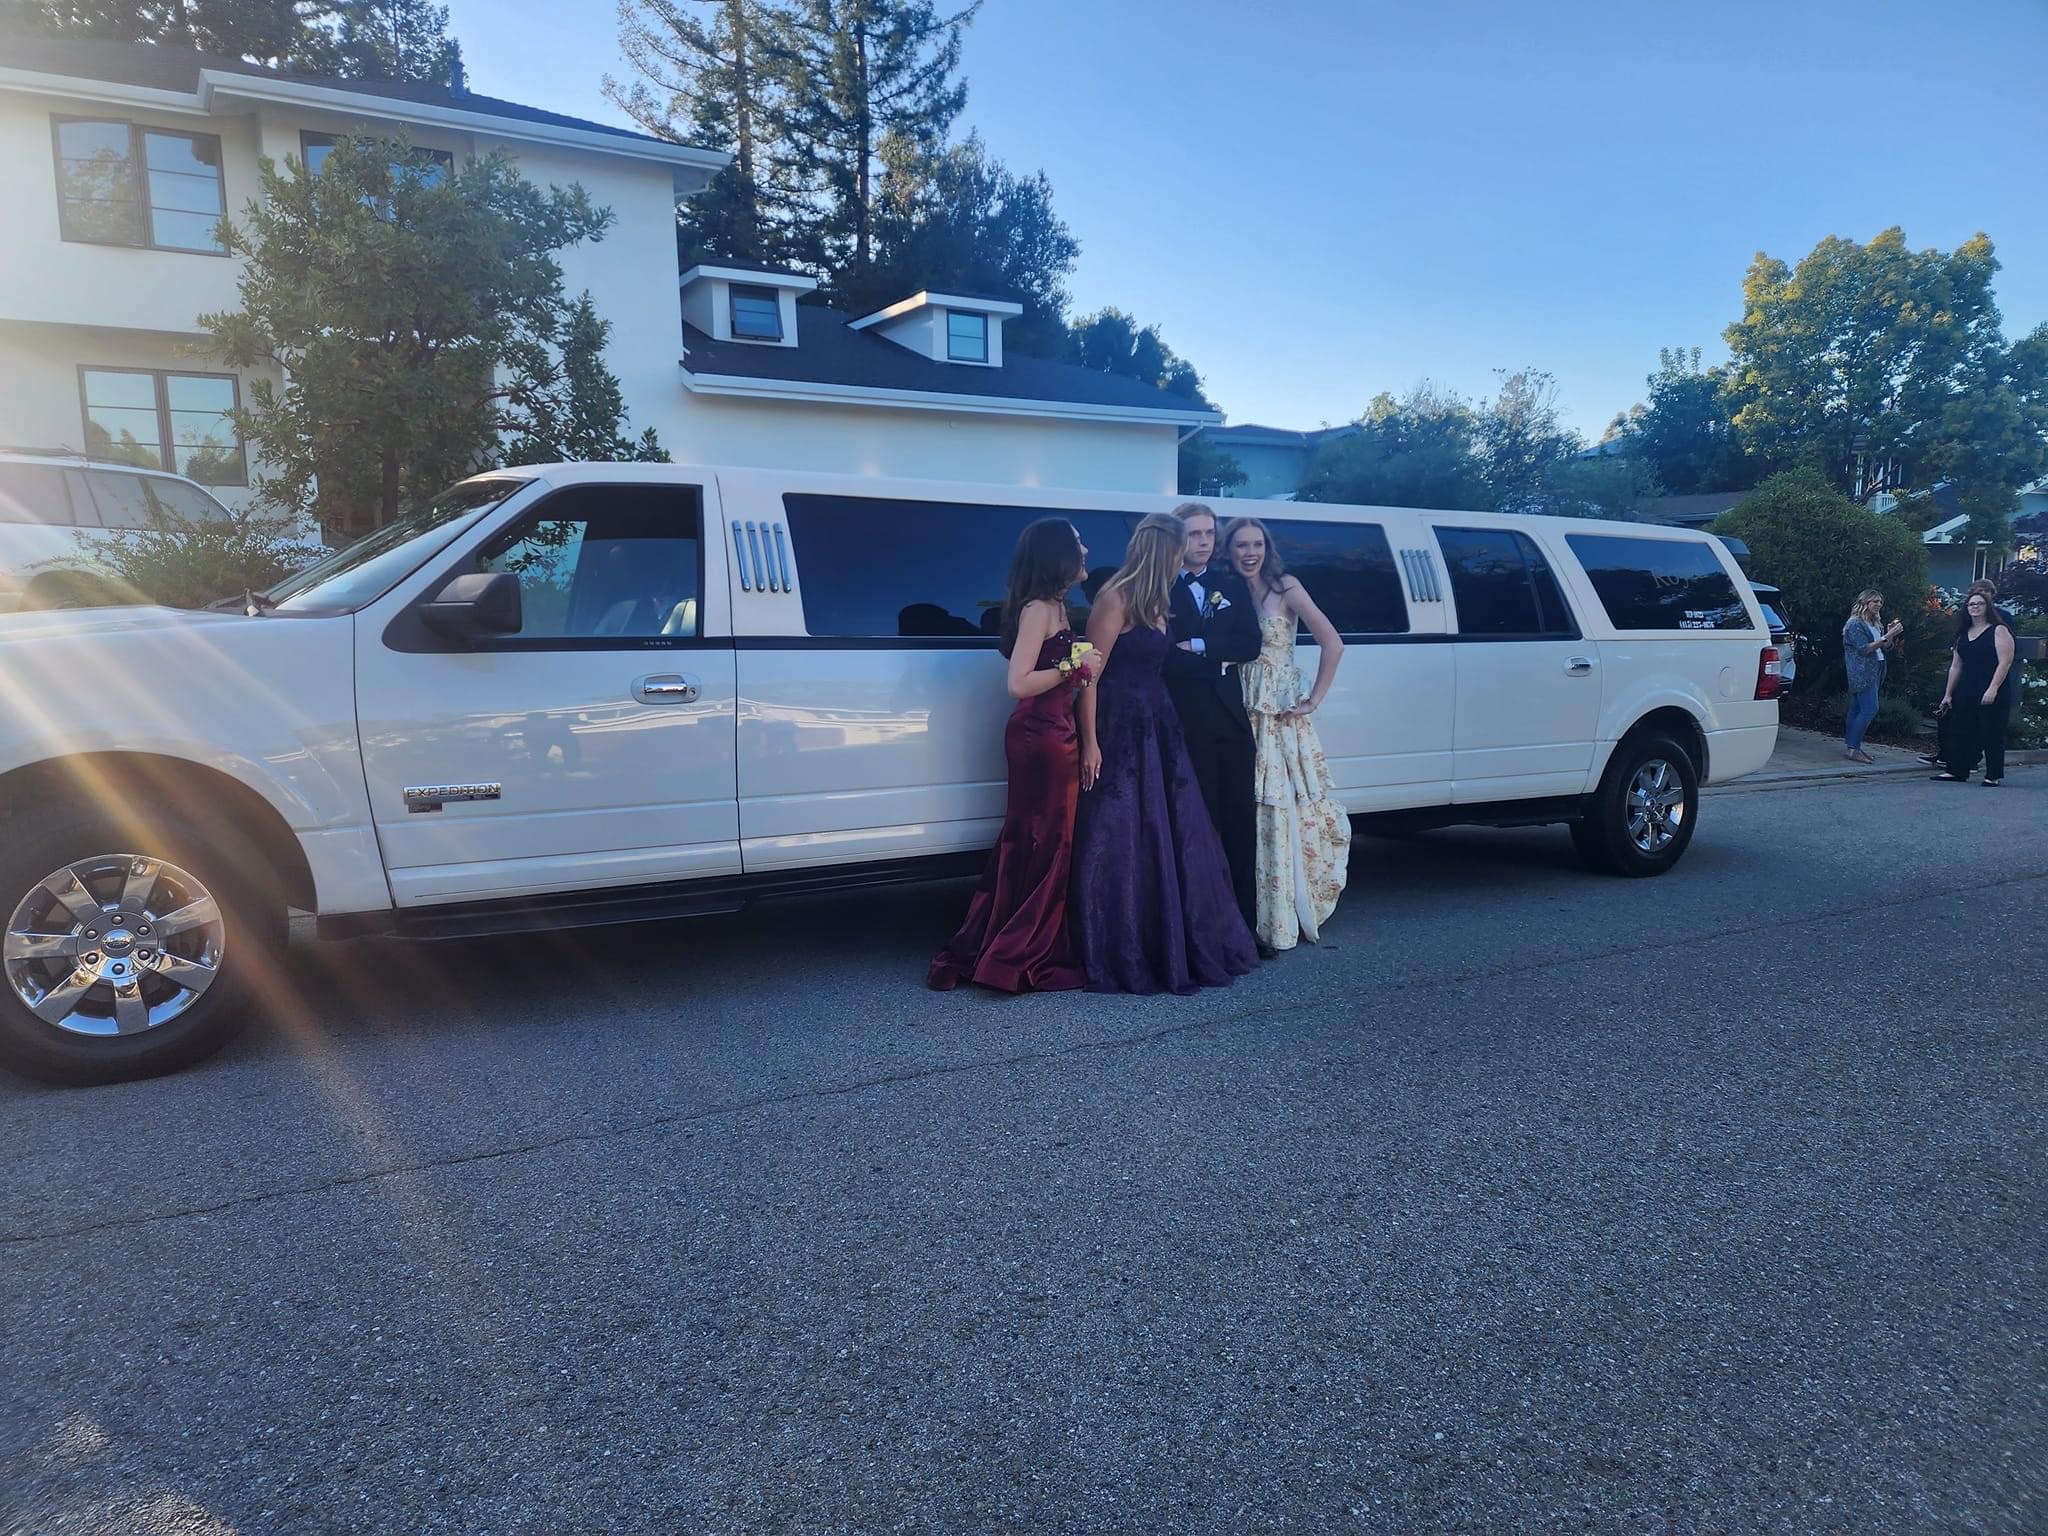 A group of individuals standing beside a black limousine, provided by a professional car service.